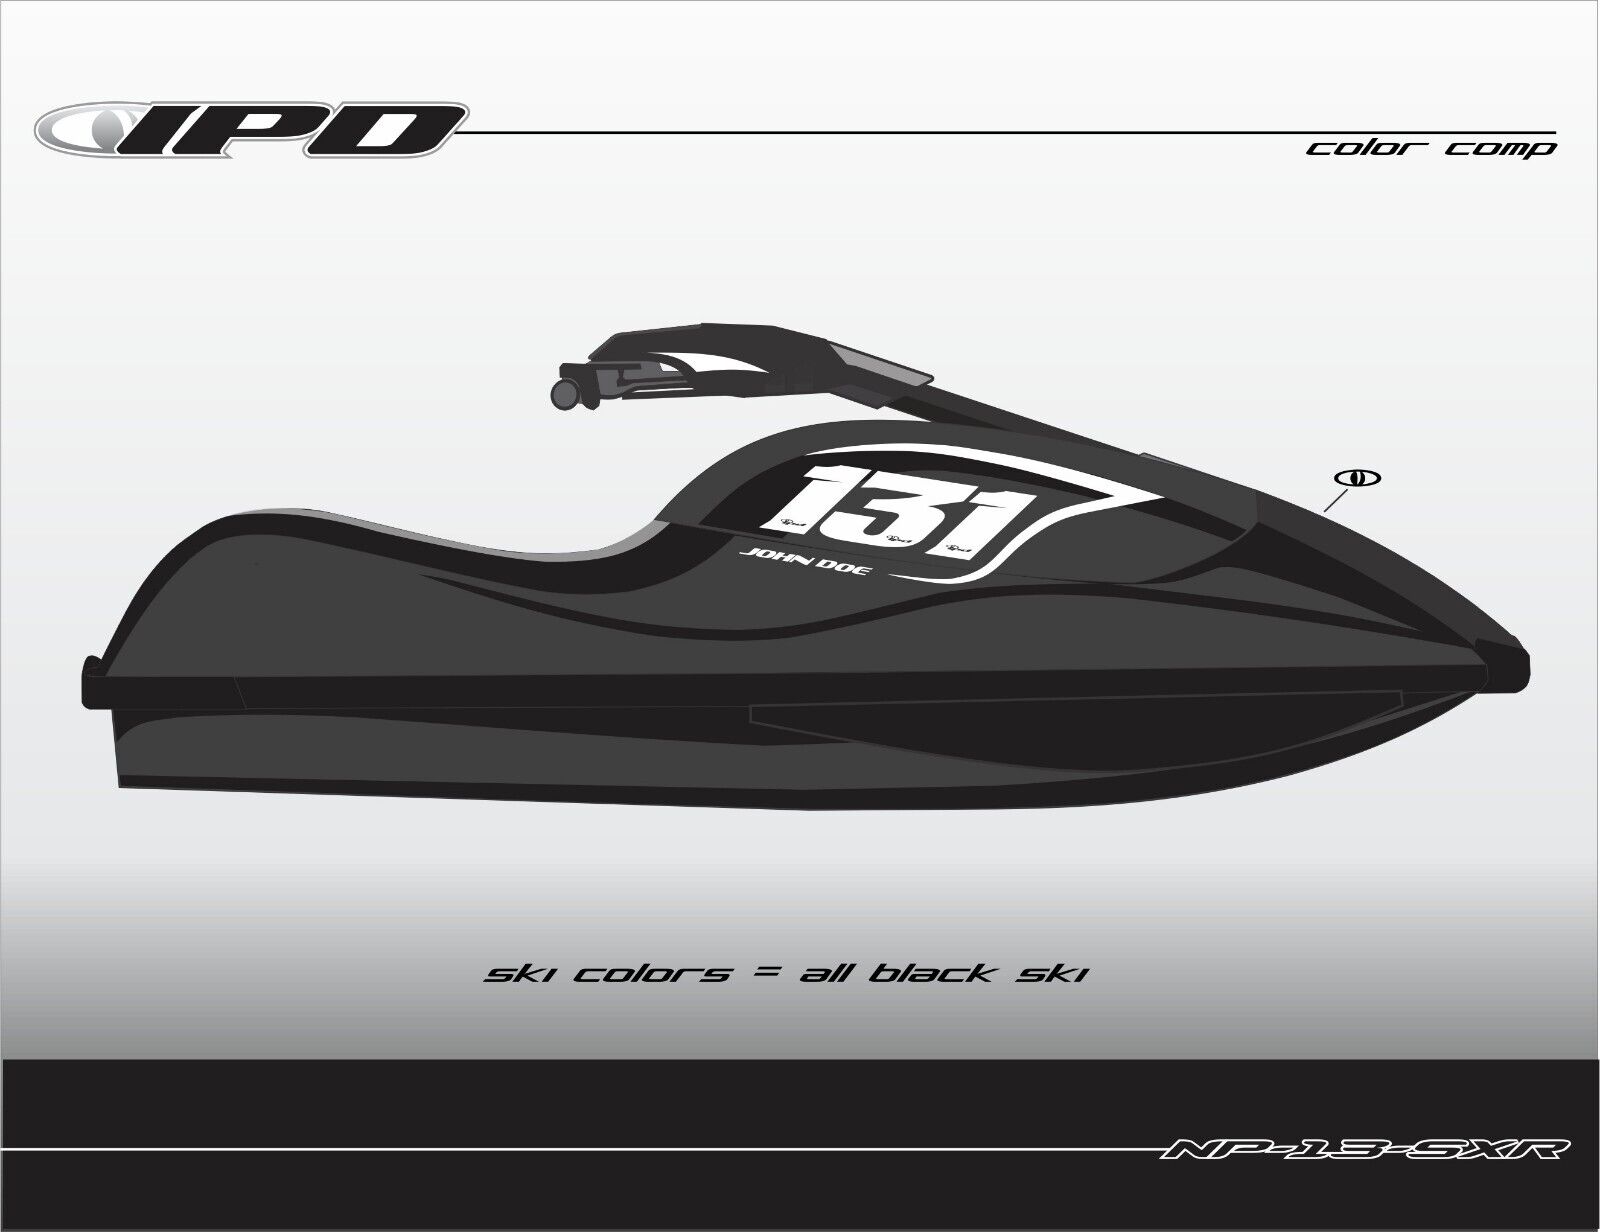 IPD Flow Design Race Number Plate Kit for Kawasaki SXR